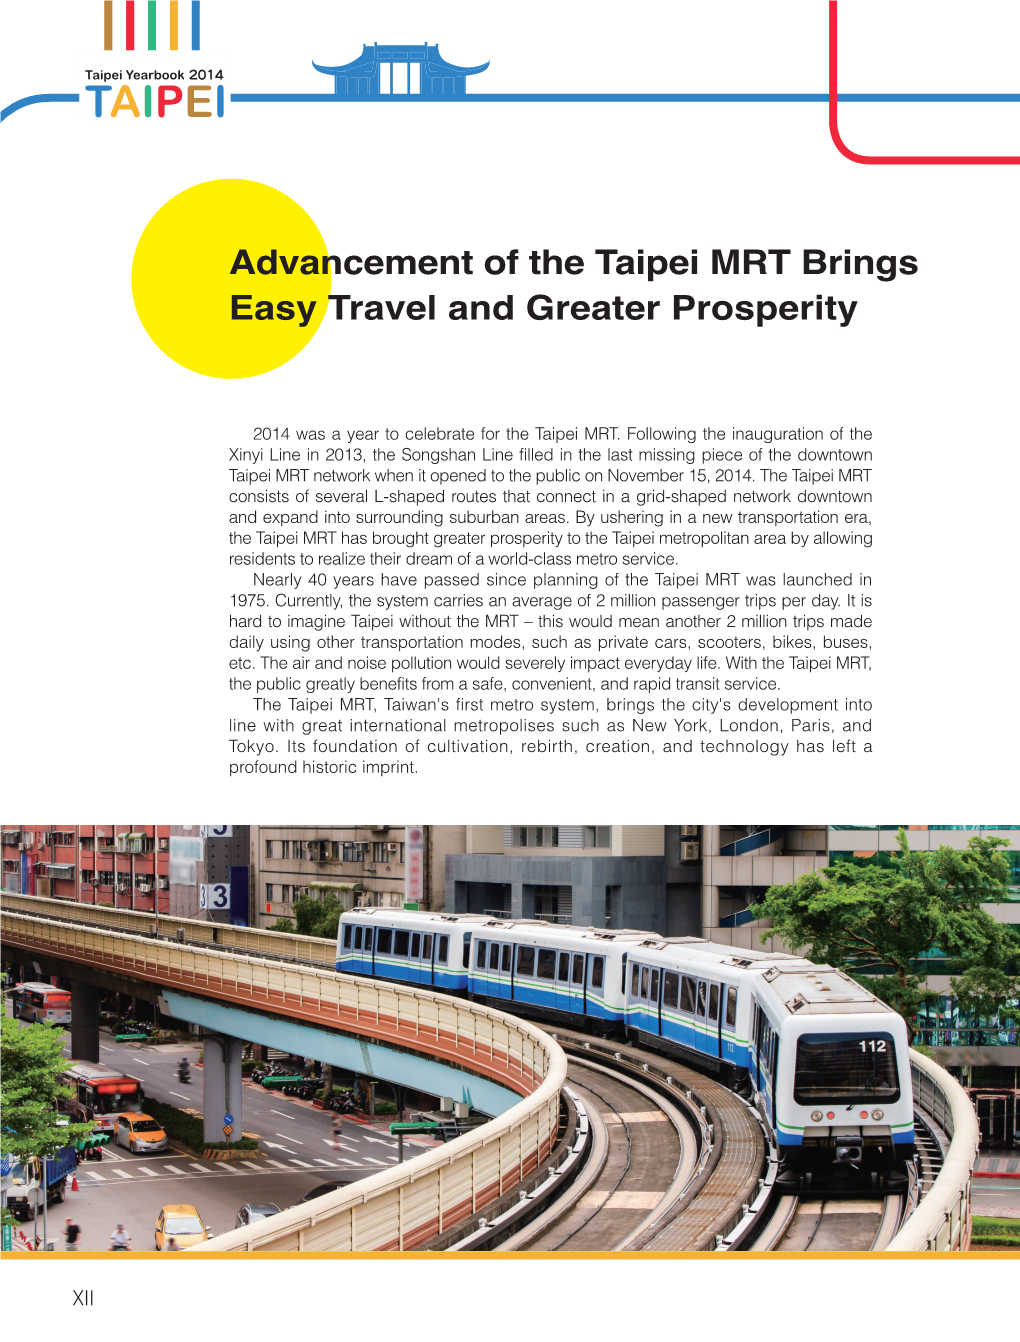 Advancement of the Taipei MRT Brings Easy Travel and Greater Prosperity